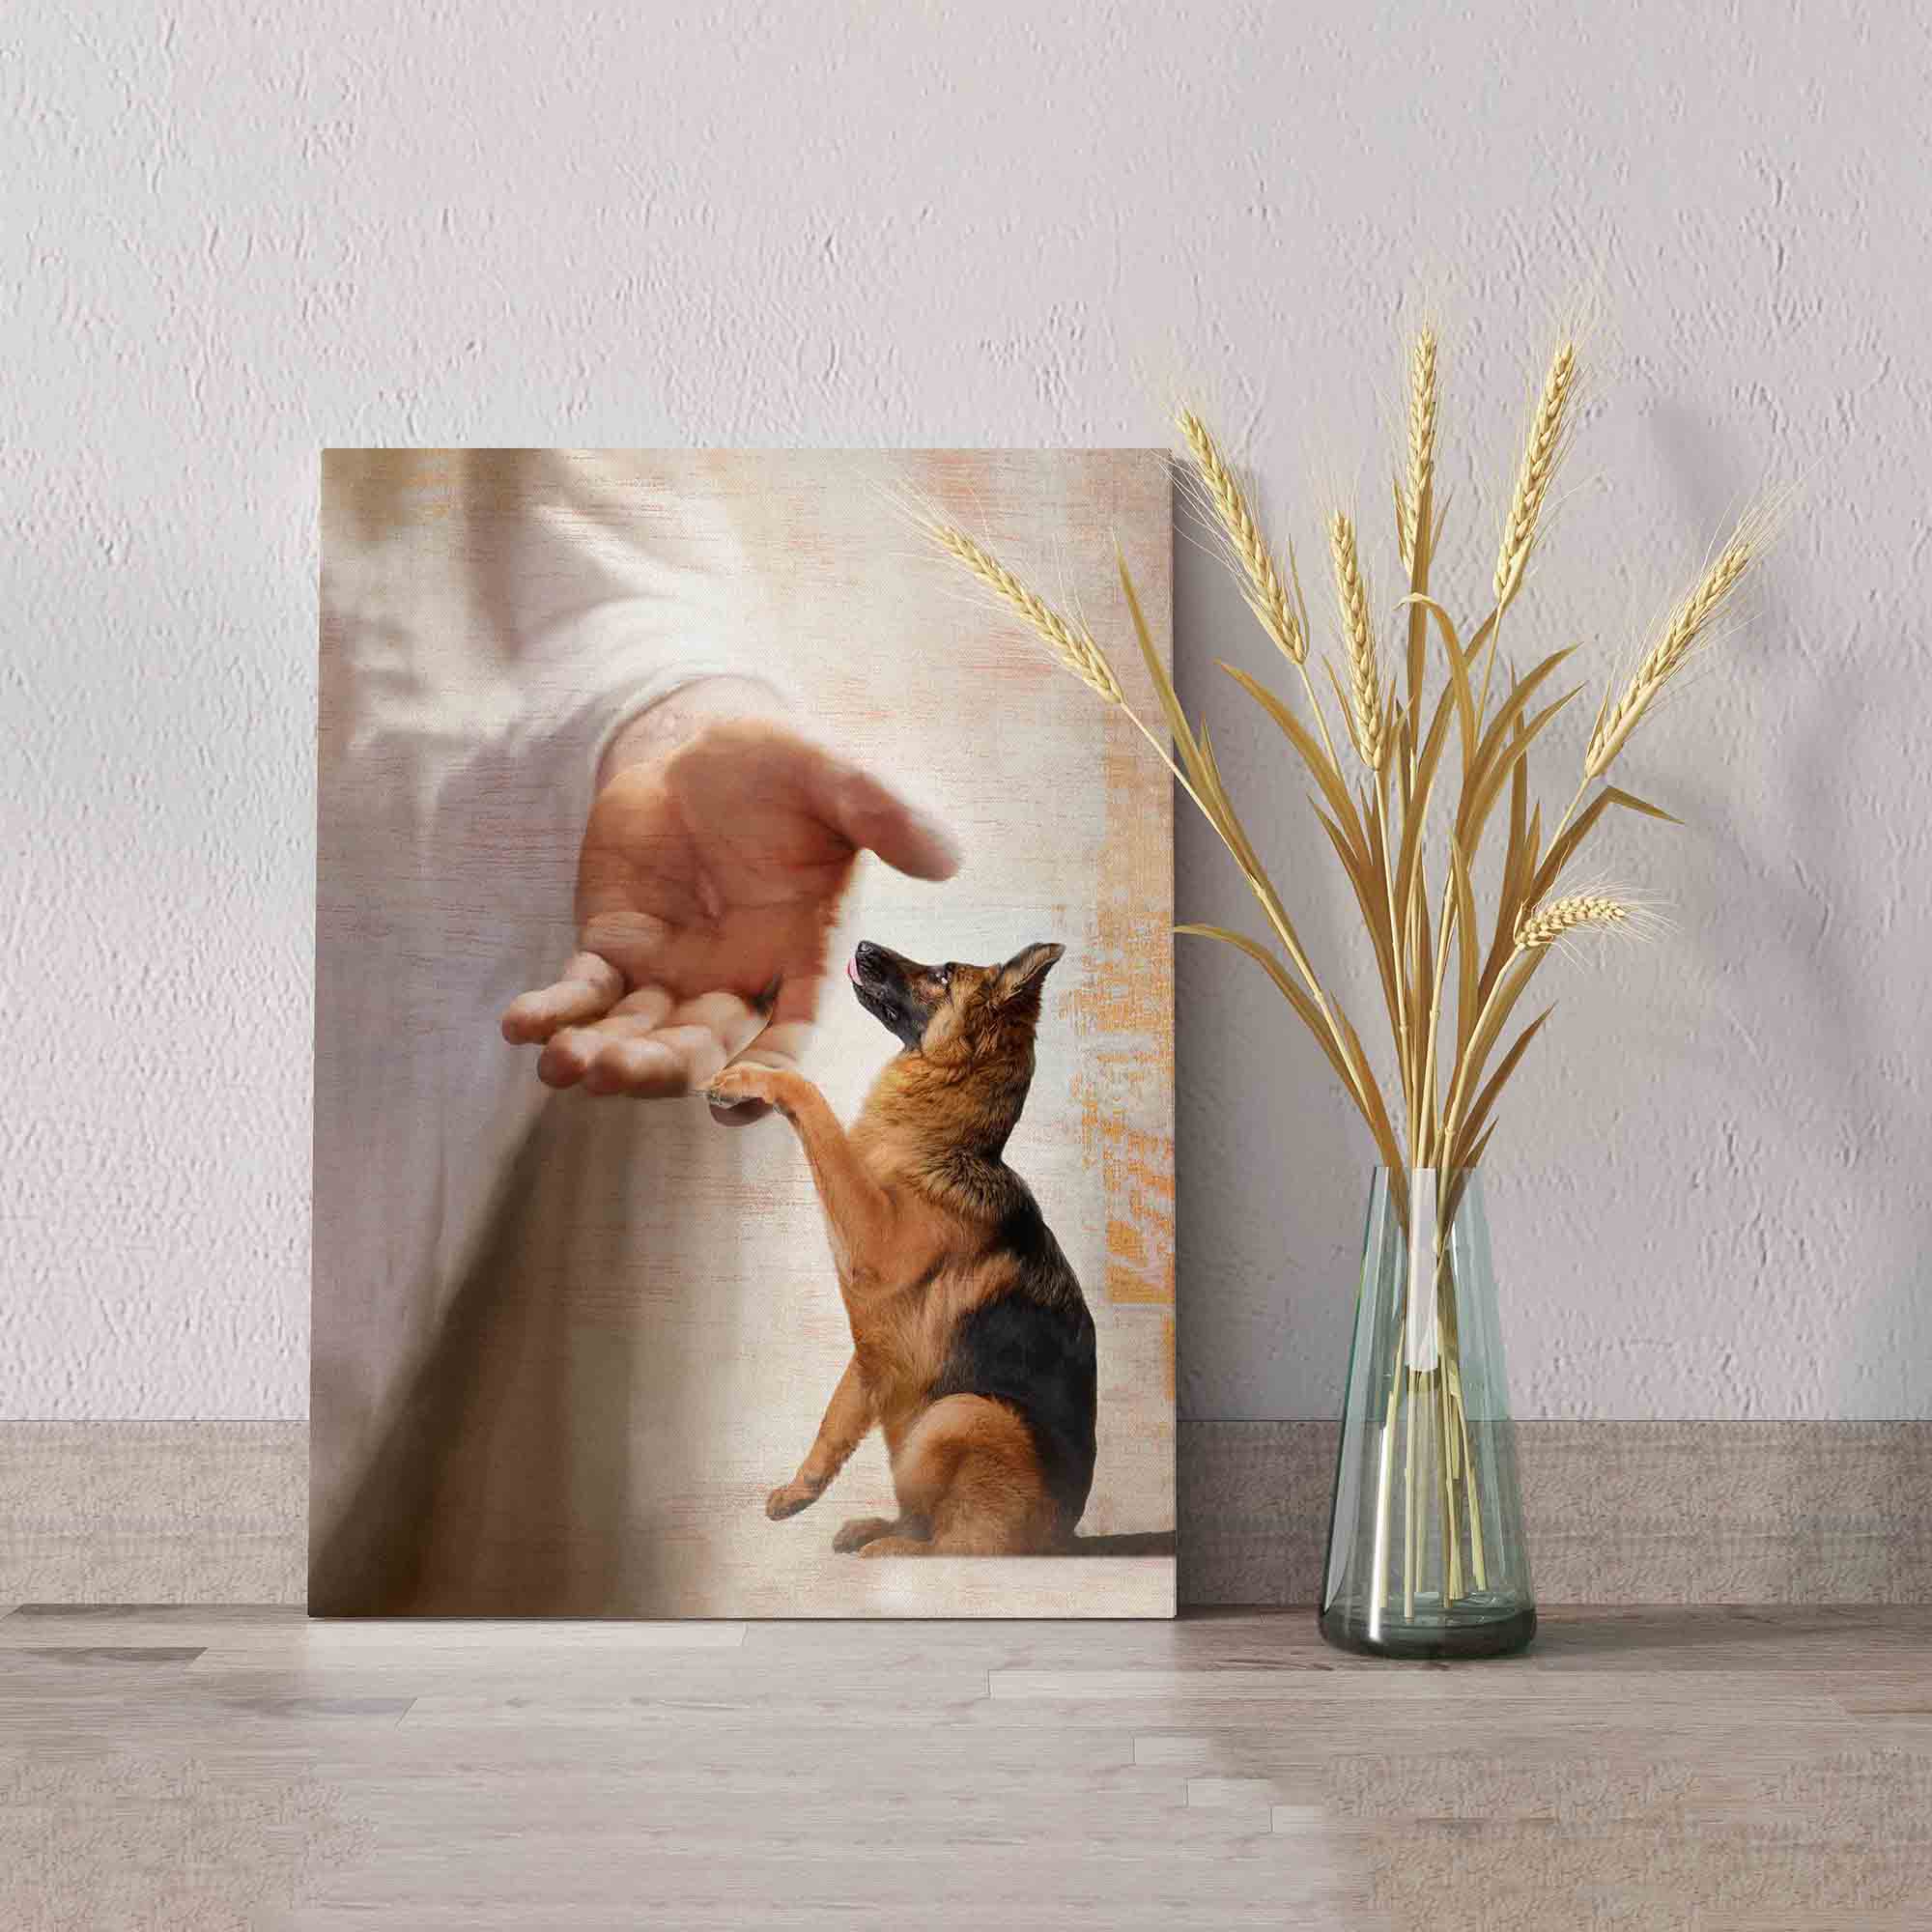 Hand Of God Canvas, Take My Hand Canvas, German Shepherd, Dog Canvas, Family Canvas, Canvas For Gift